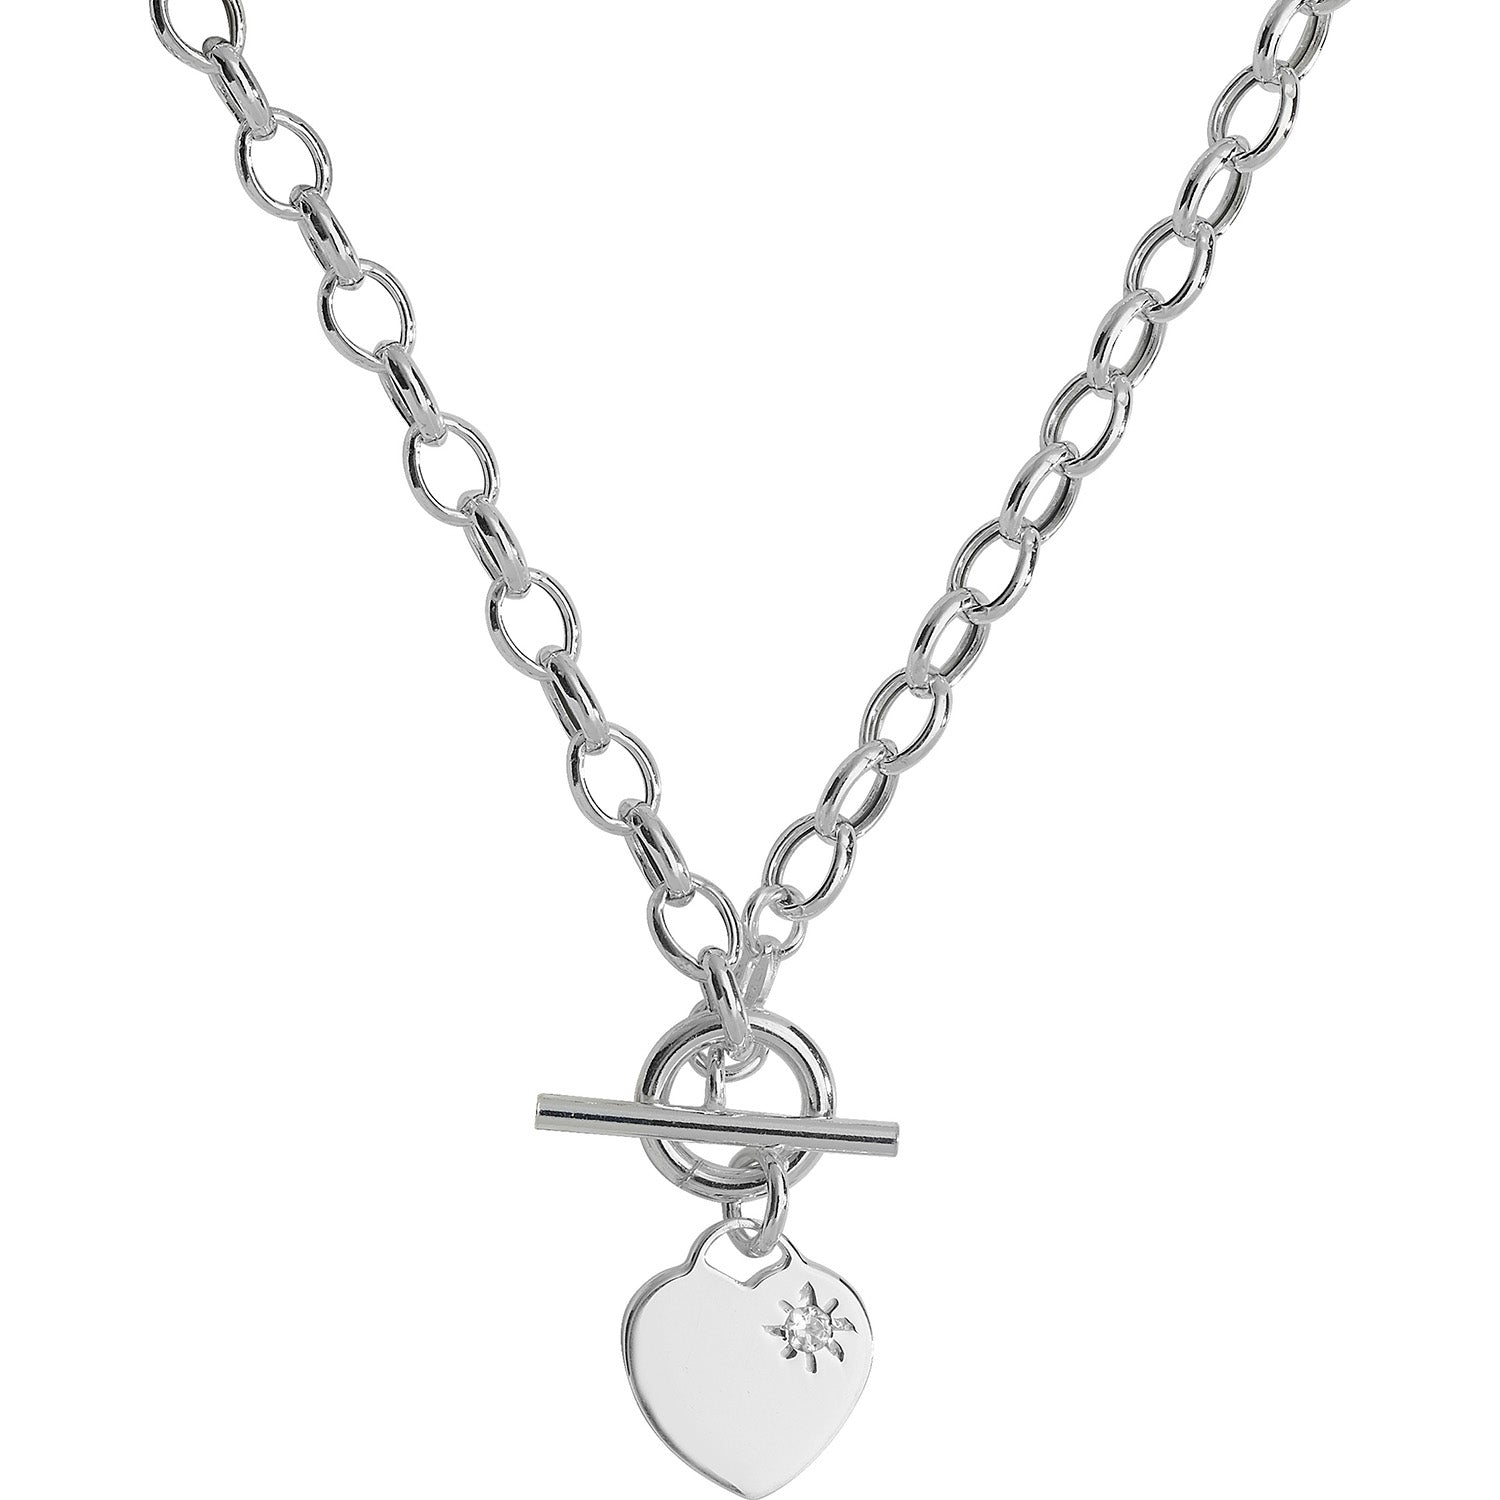 SILVER T-BAR HEART CHARM NECKLET